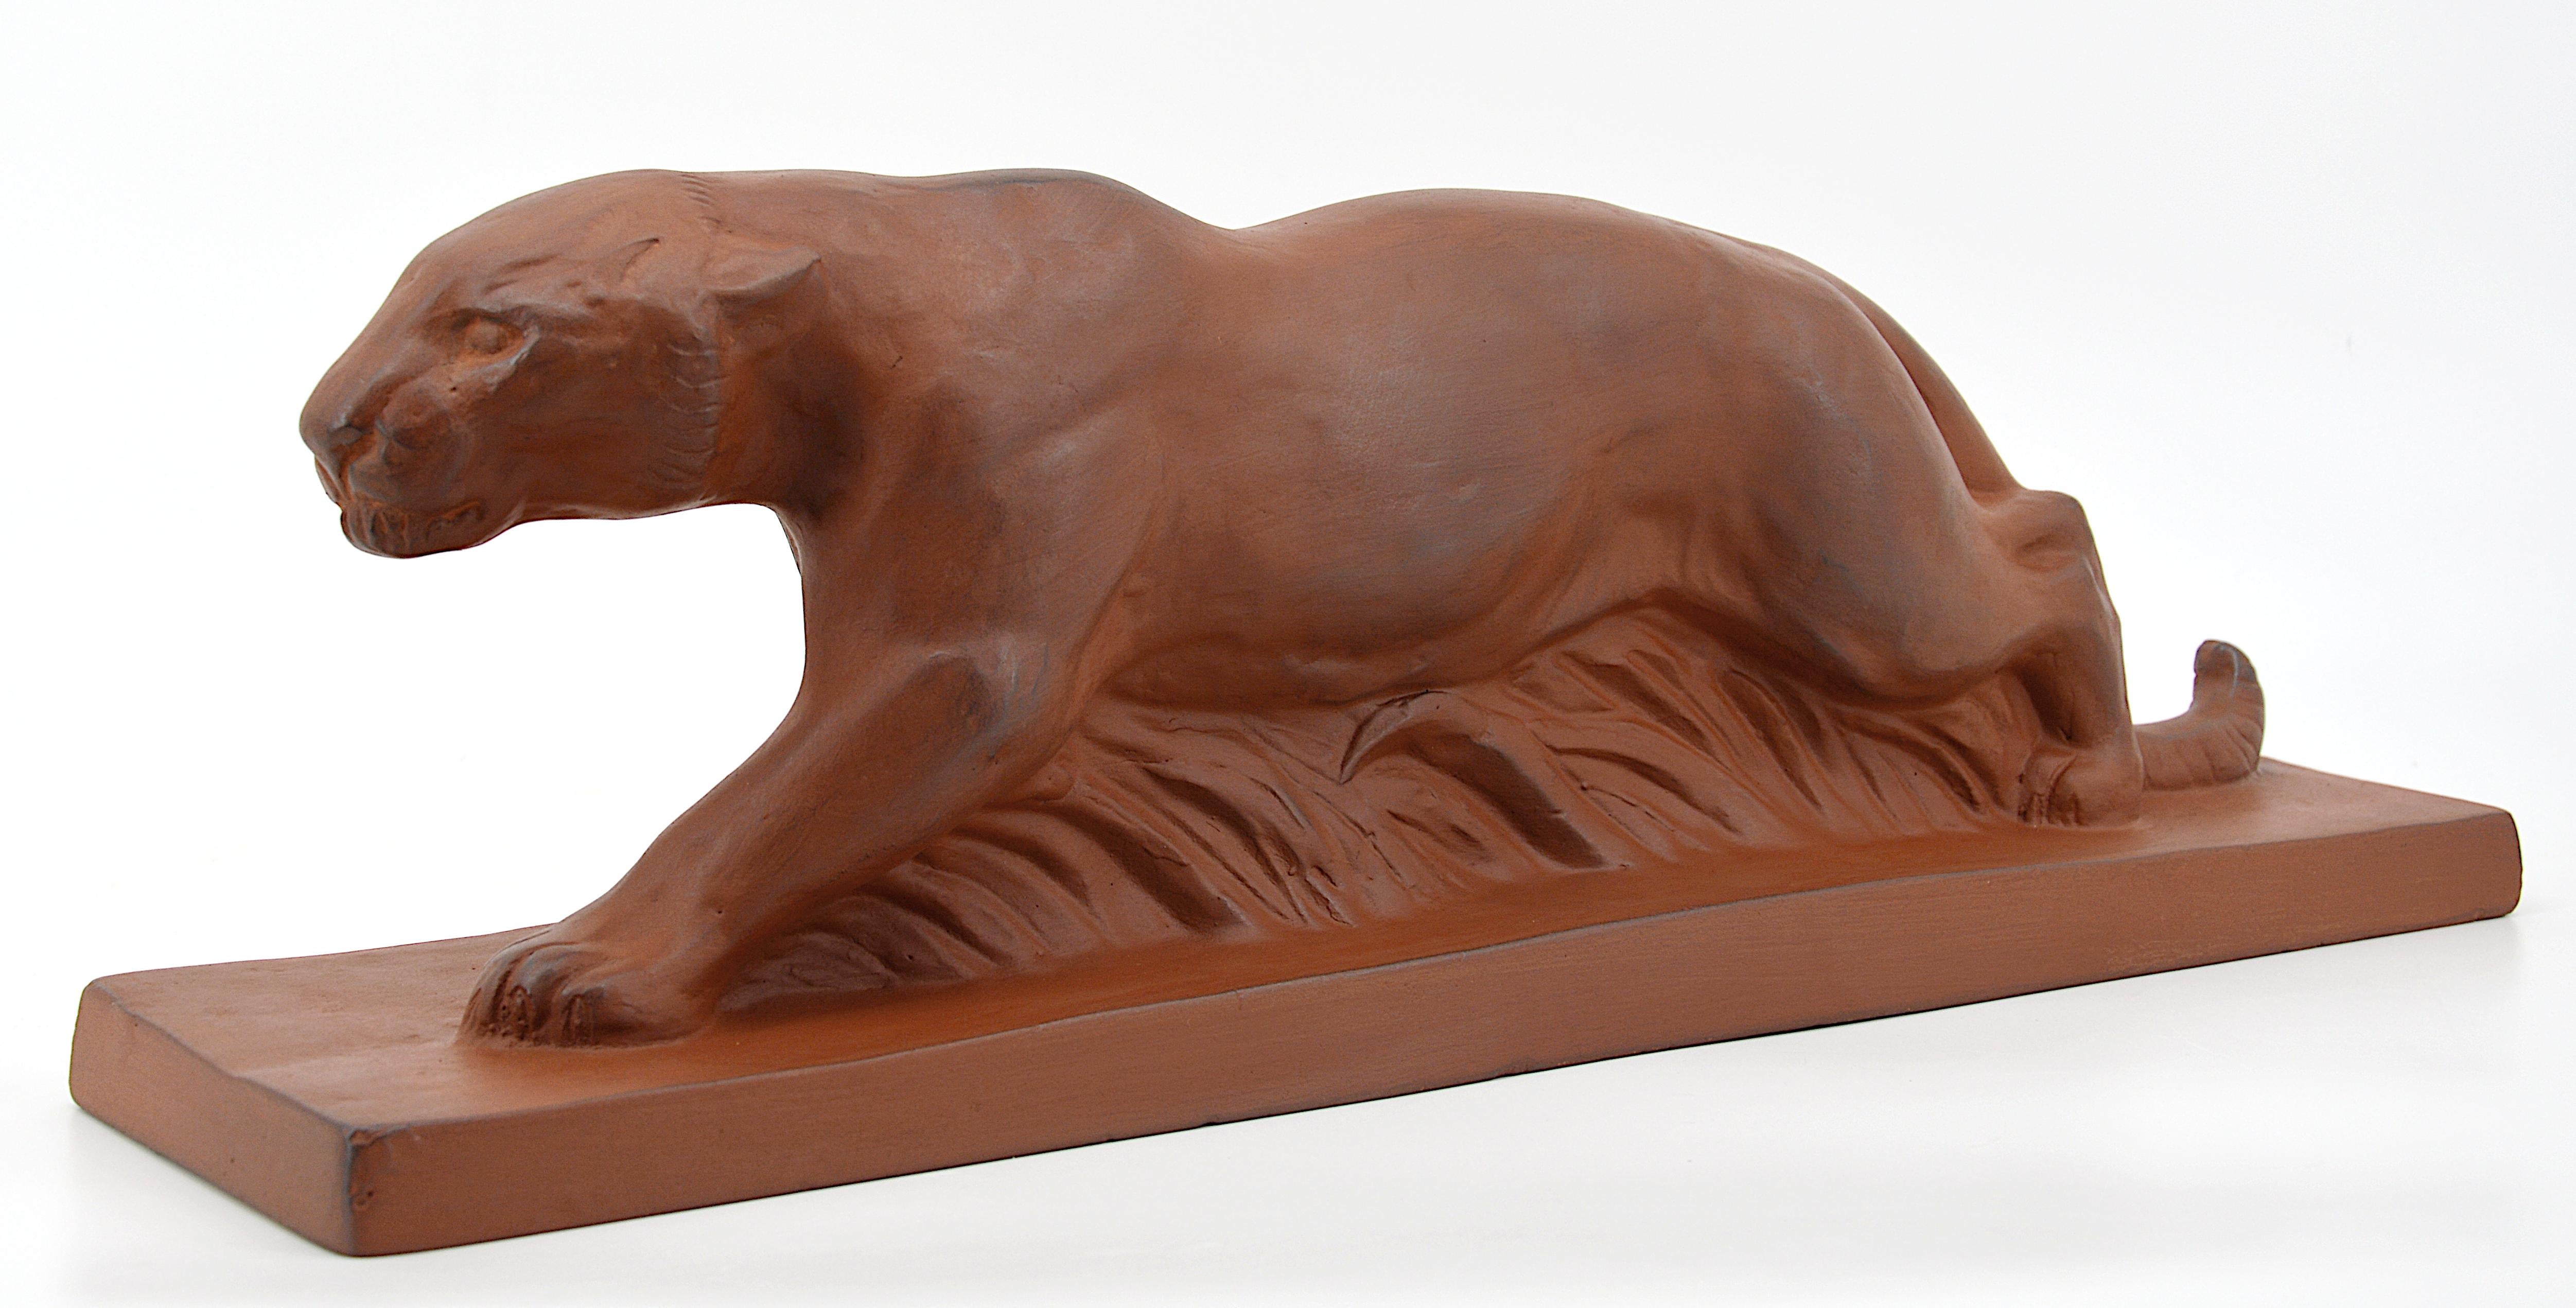 French Art Deco Terracotta Lioness Sculpture by Michael, 1930s For Sale 1